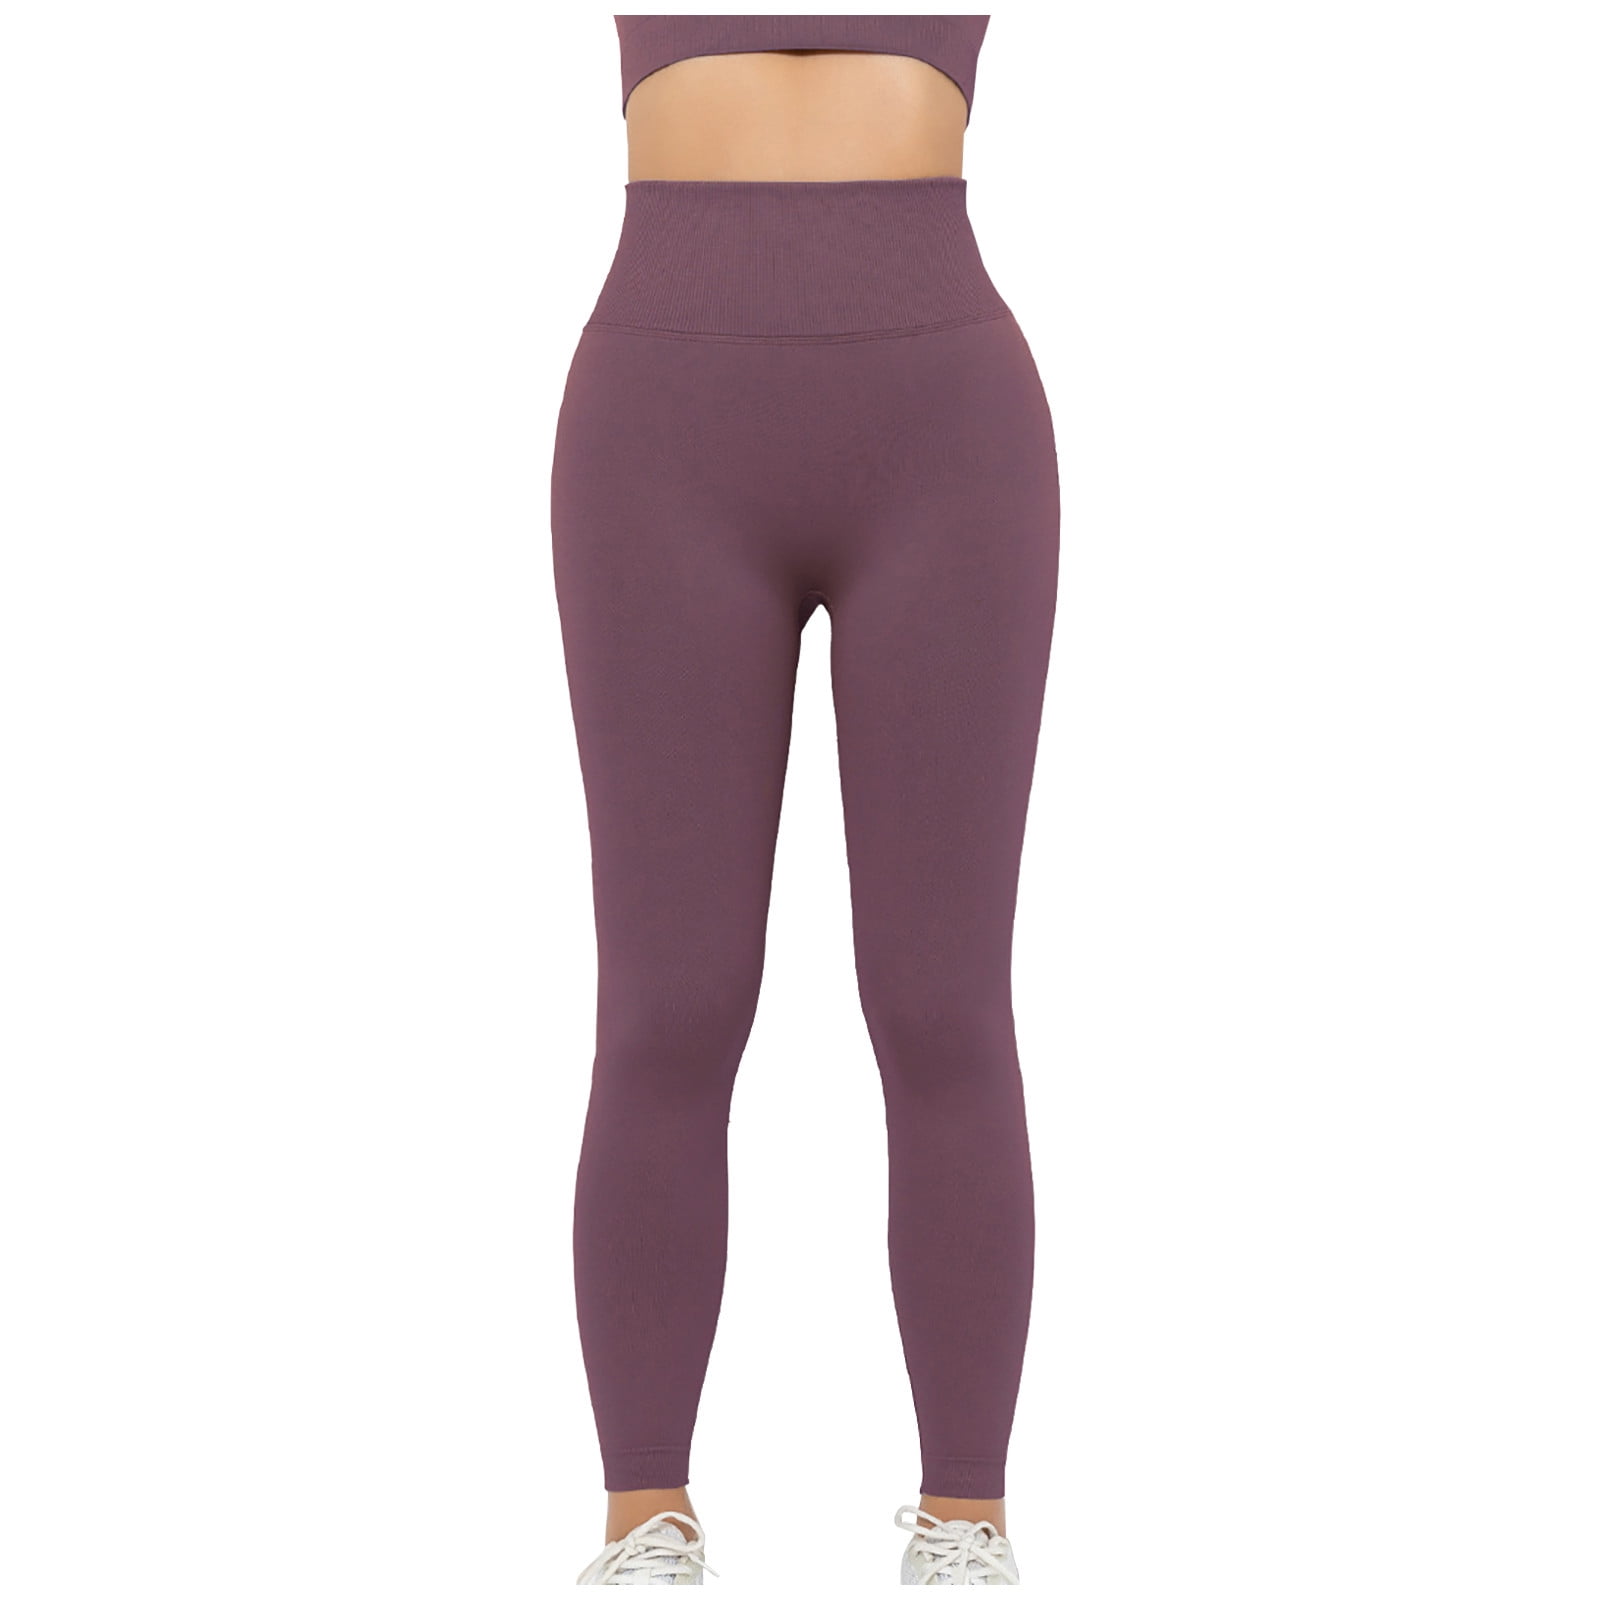 Leggings Clearance Sales Gym Span Spring Yoga Pant Oversized